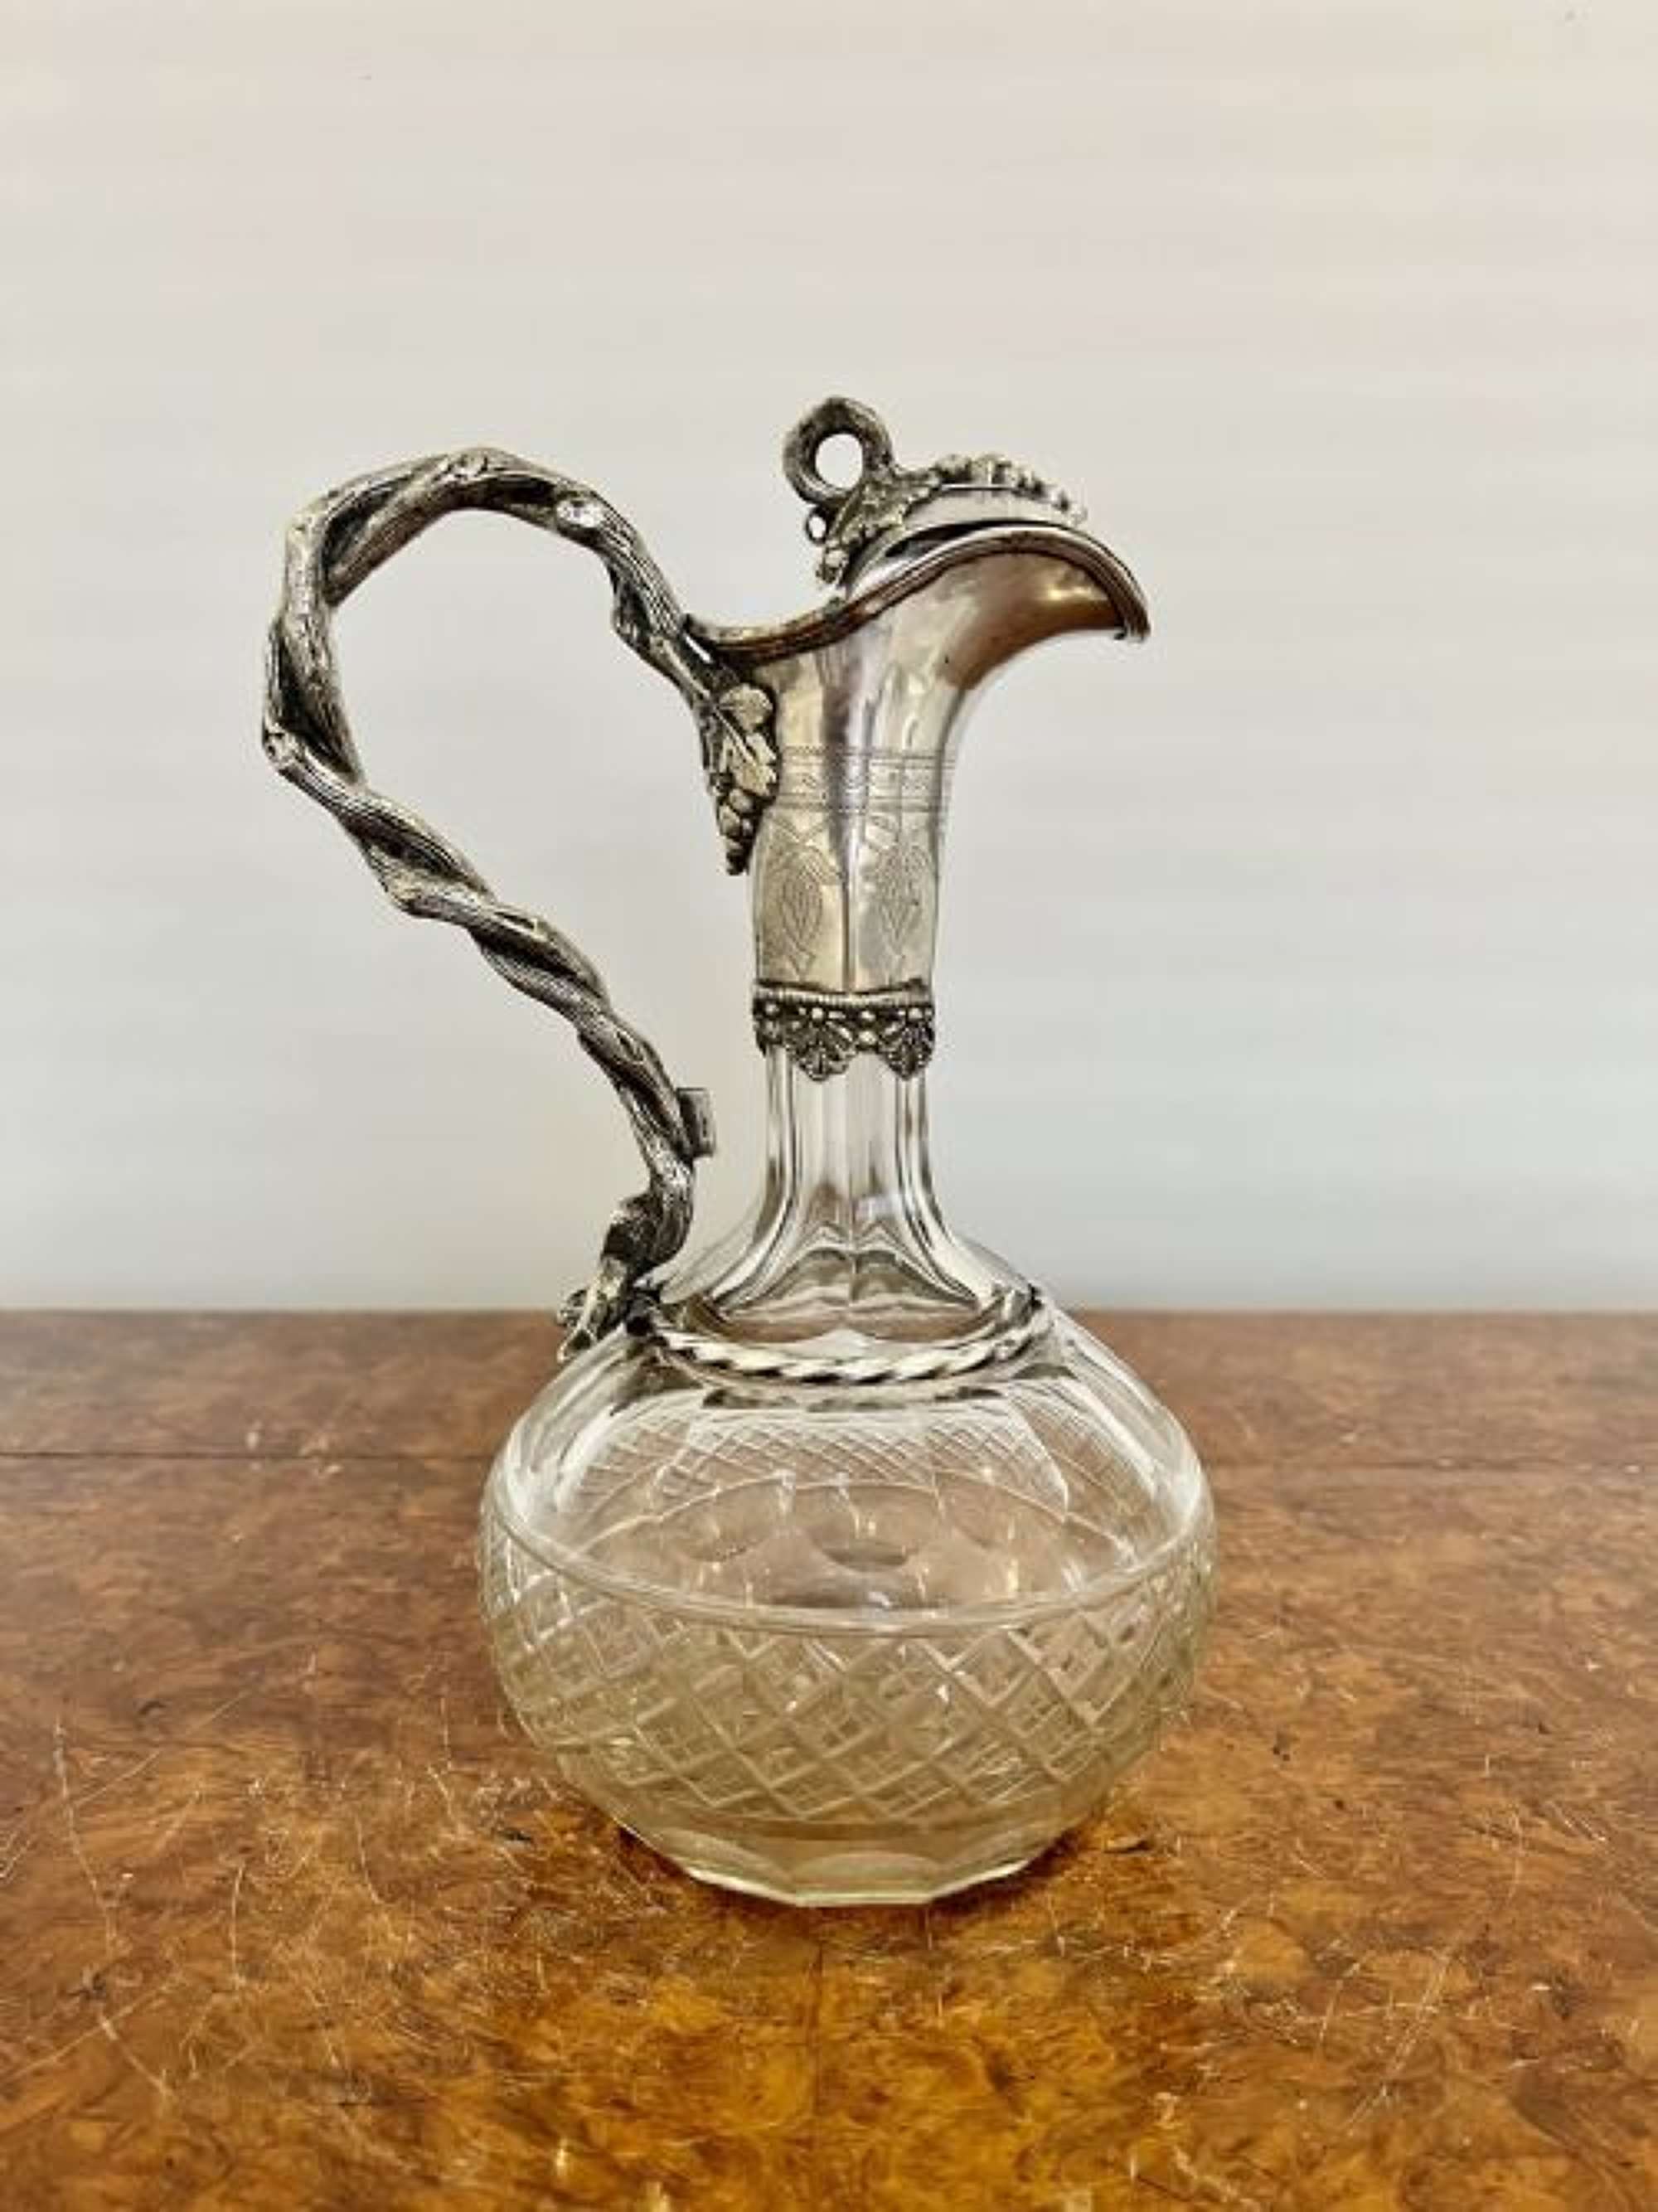 Outstanding Quality Antique Victorian Cut Glass And Silver Plated Claret Jug